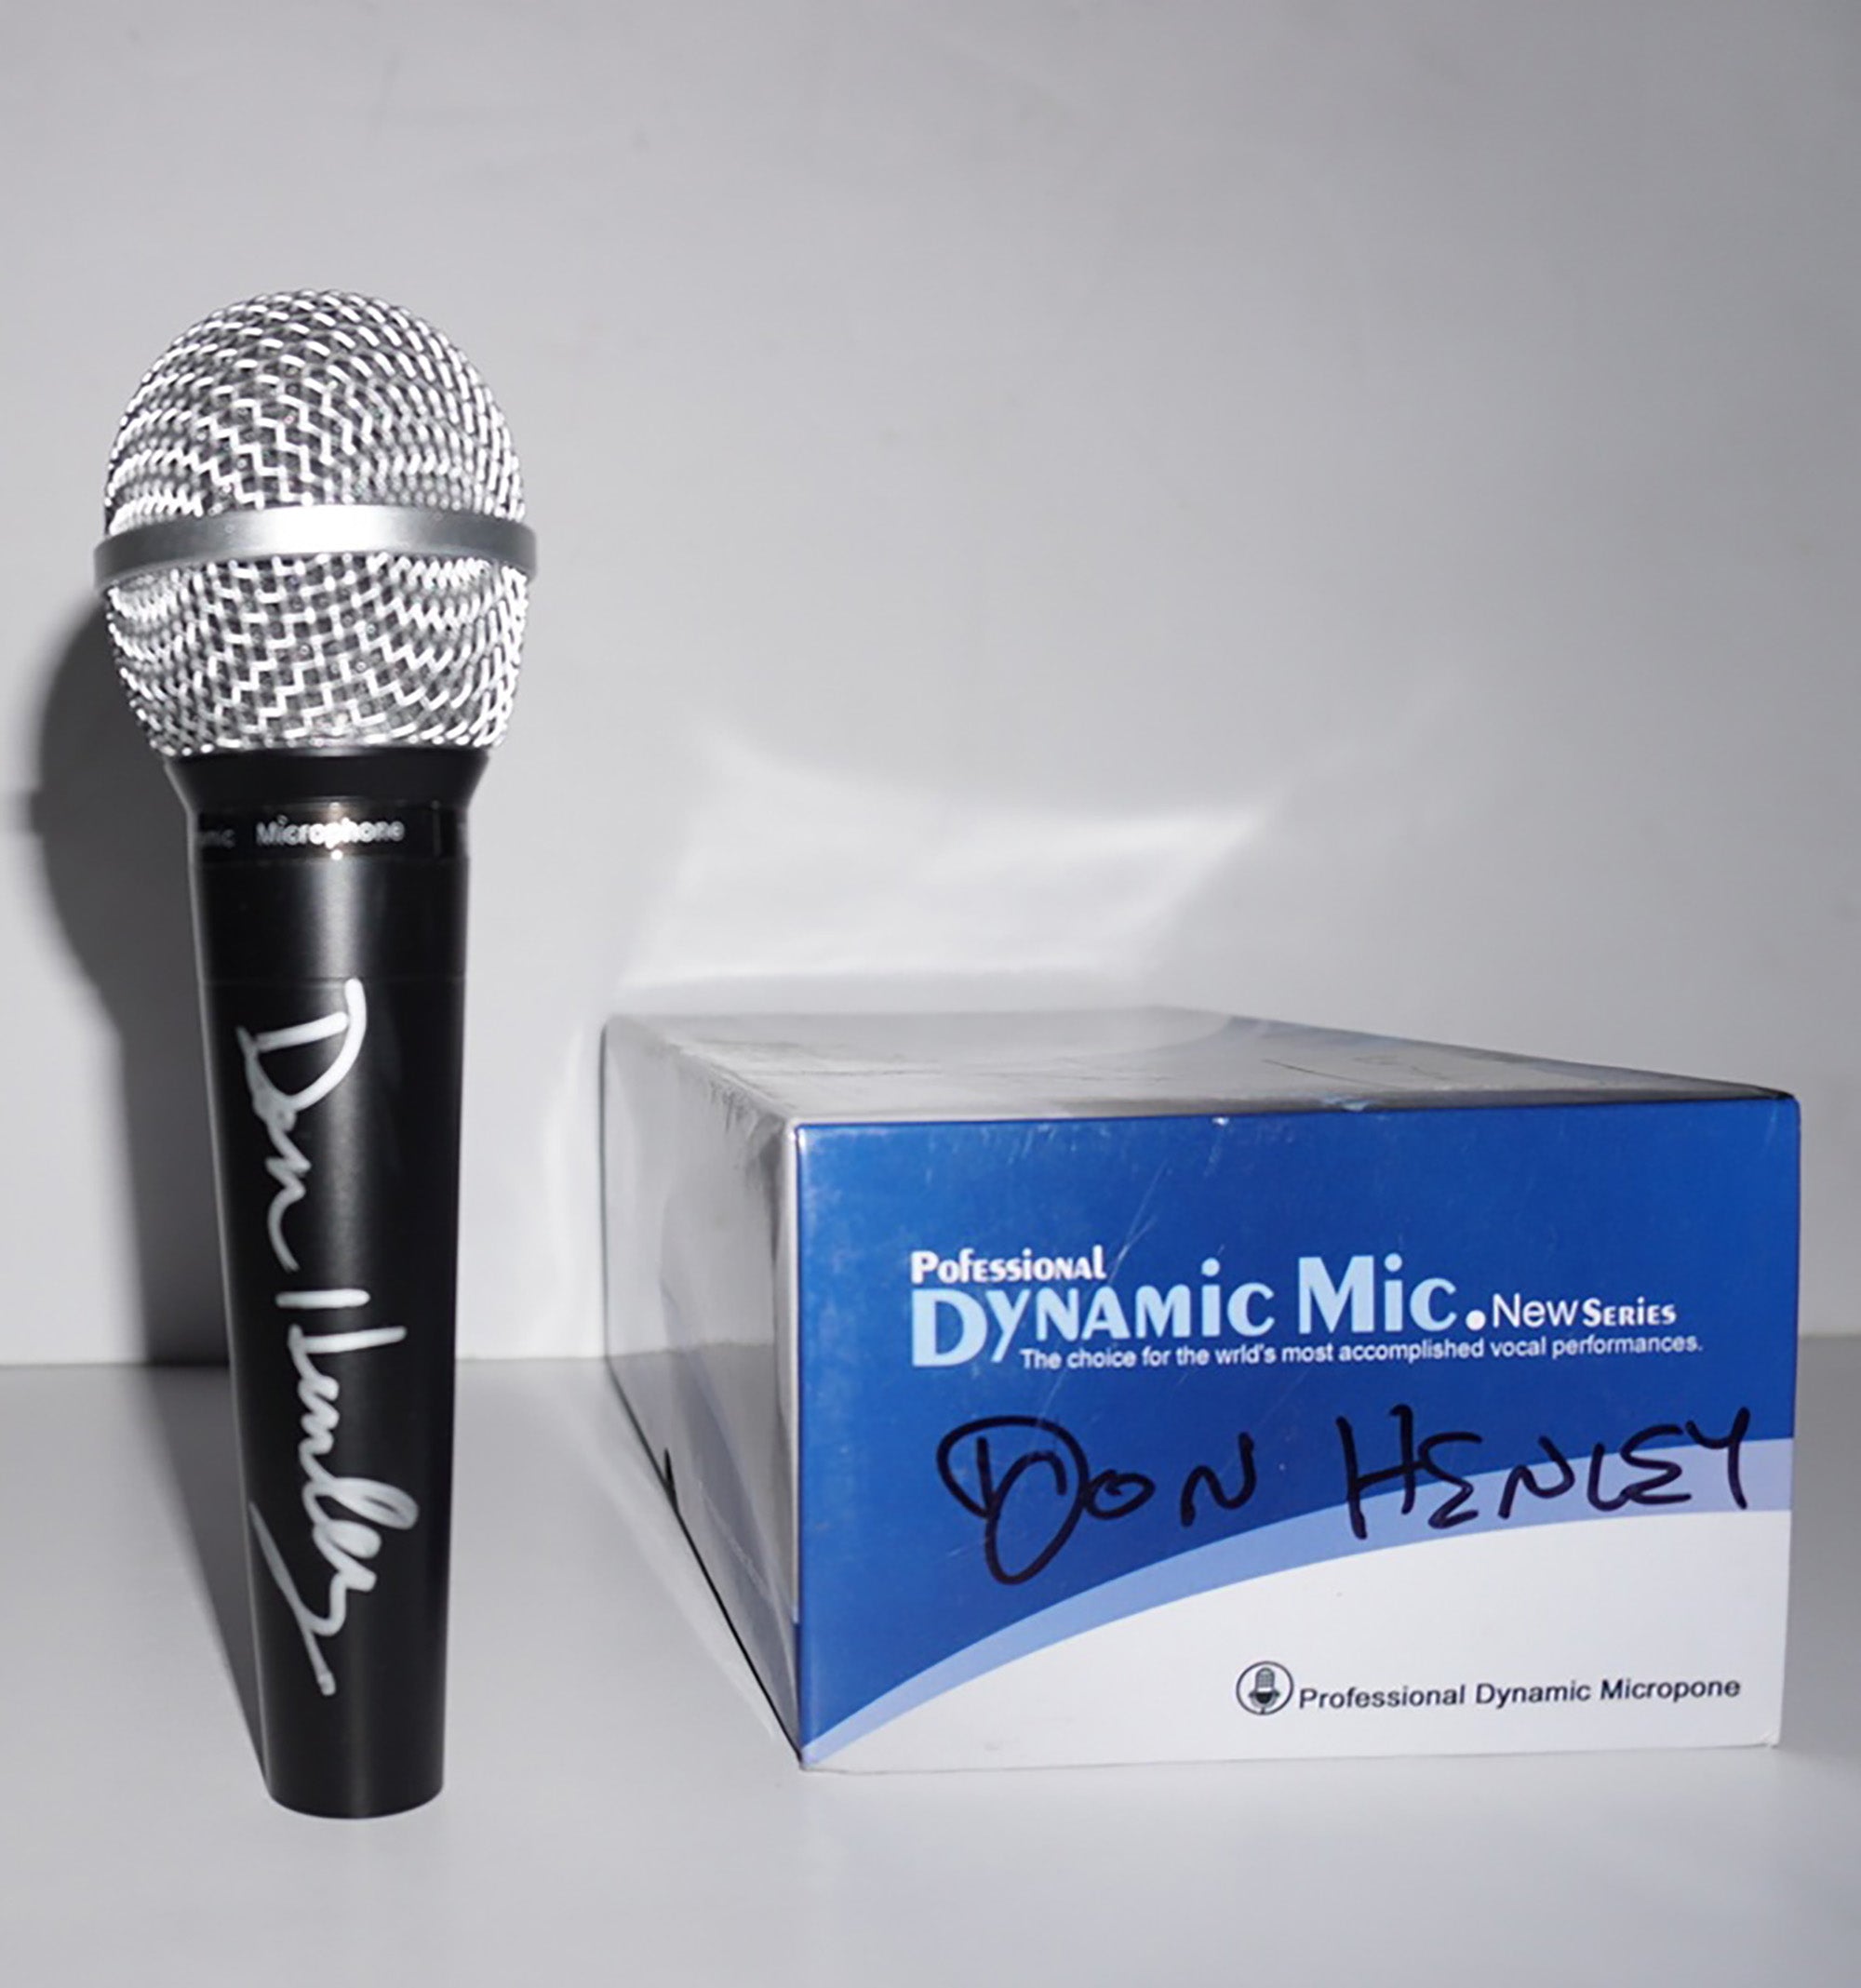 Don Henley signed microphone with proof